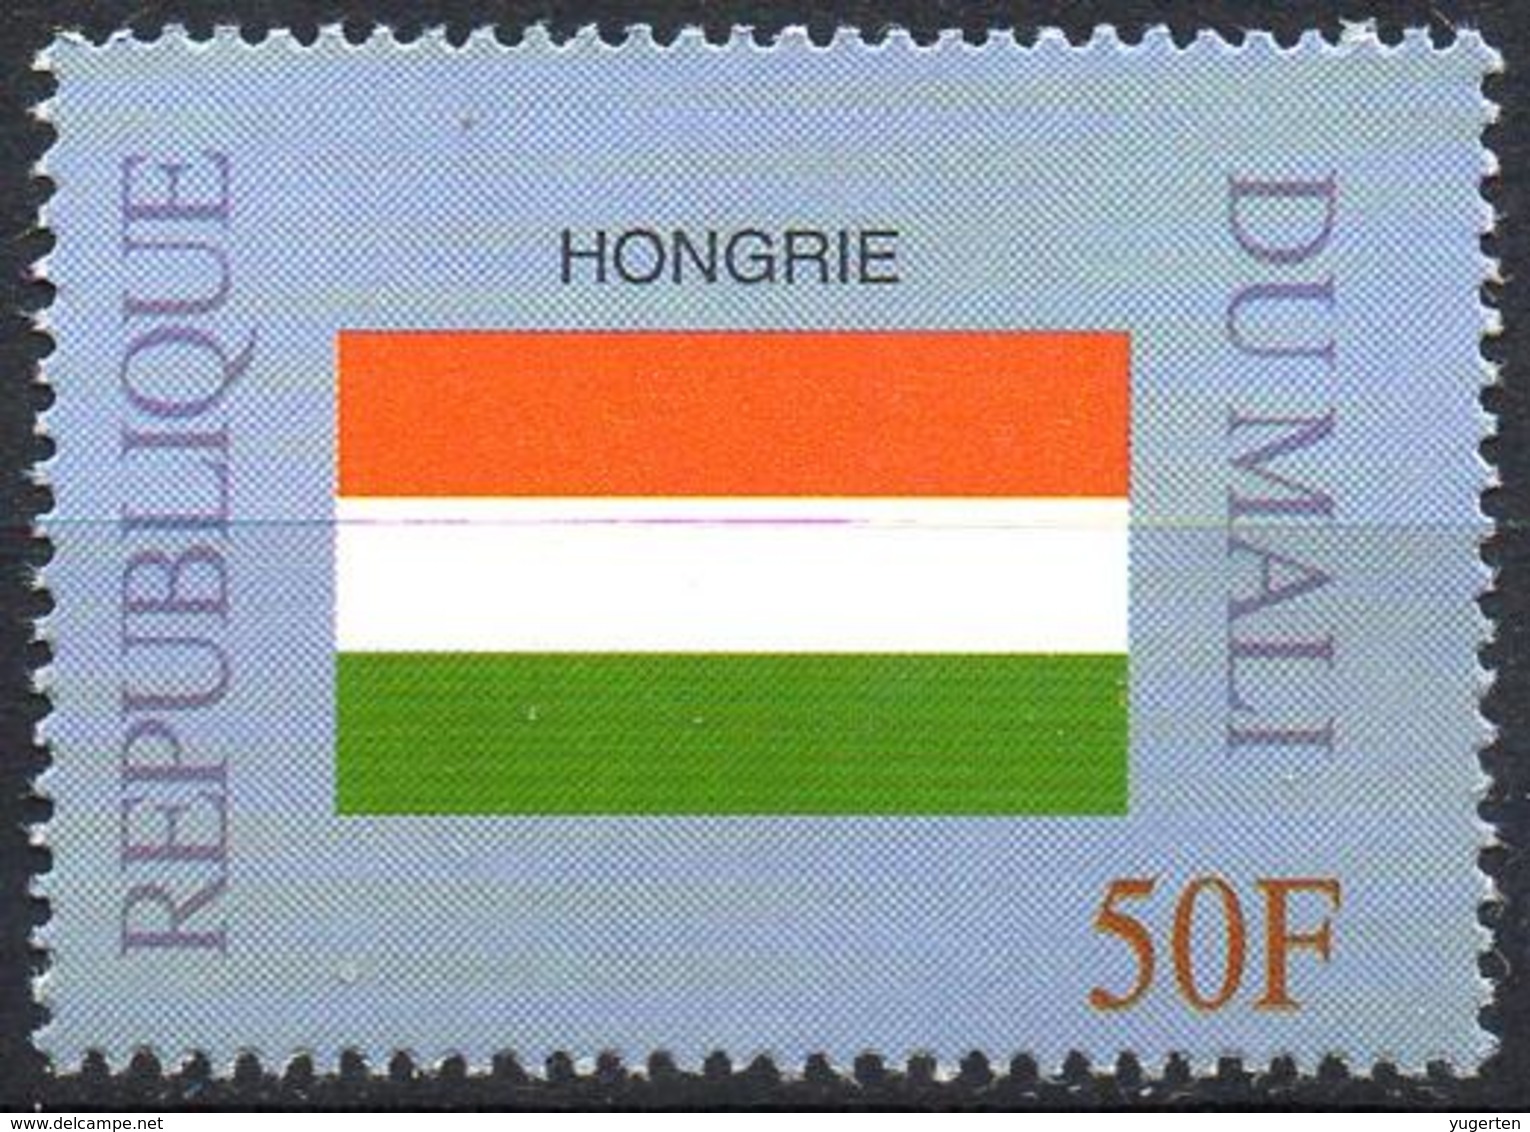 MALI 1999 - 1v - MNH** - Flag Of Hungary Hongrie Flags Drapeaux Fahnen Bandiere Banderas флаги - Timbres